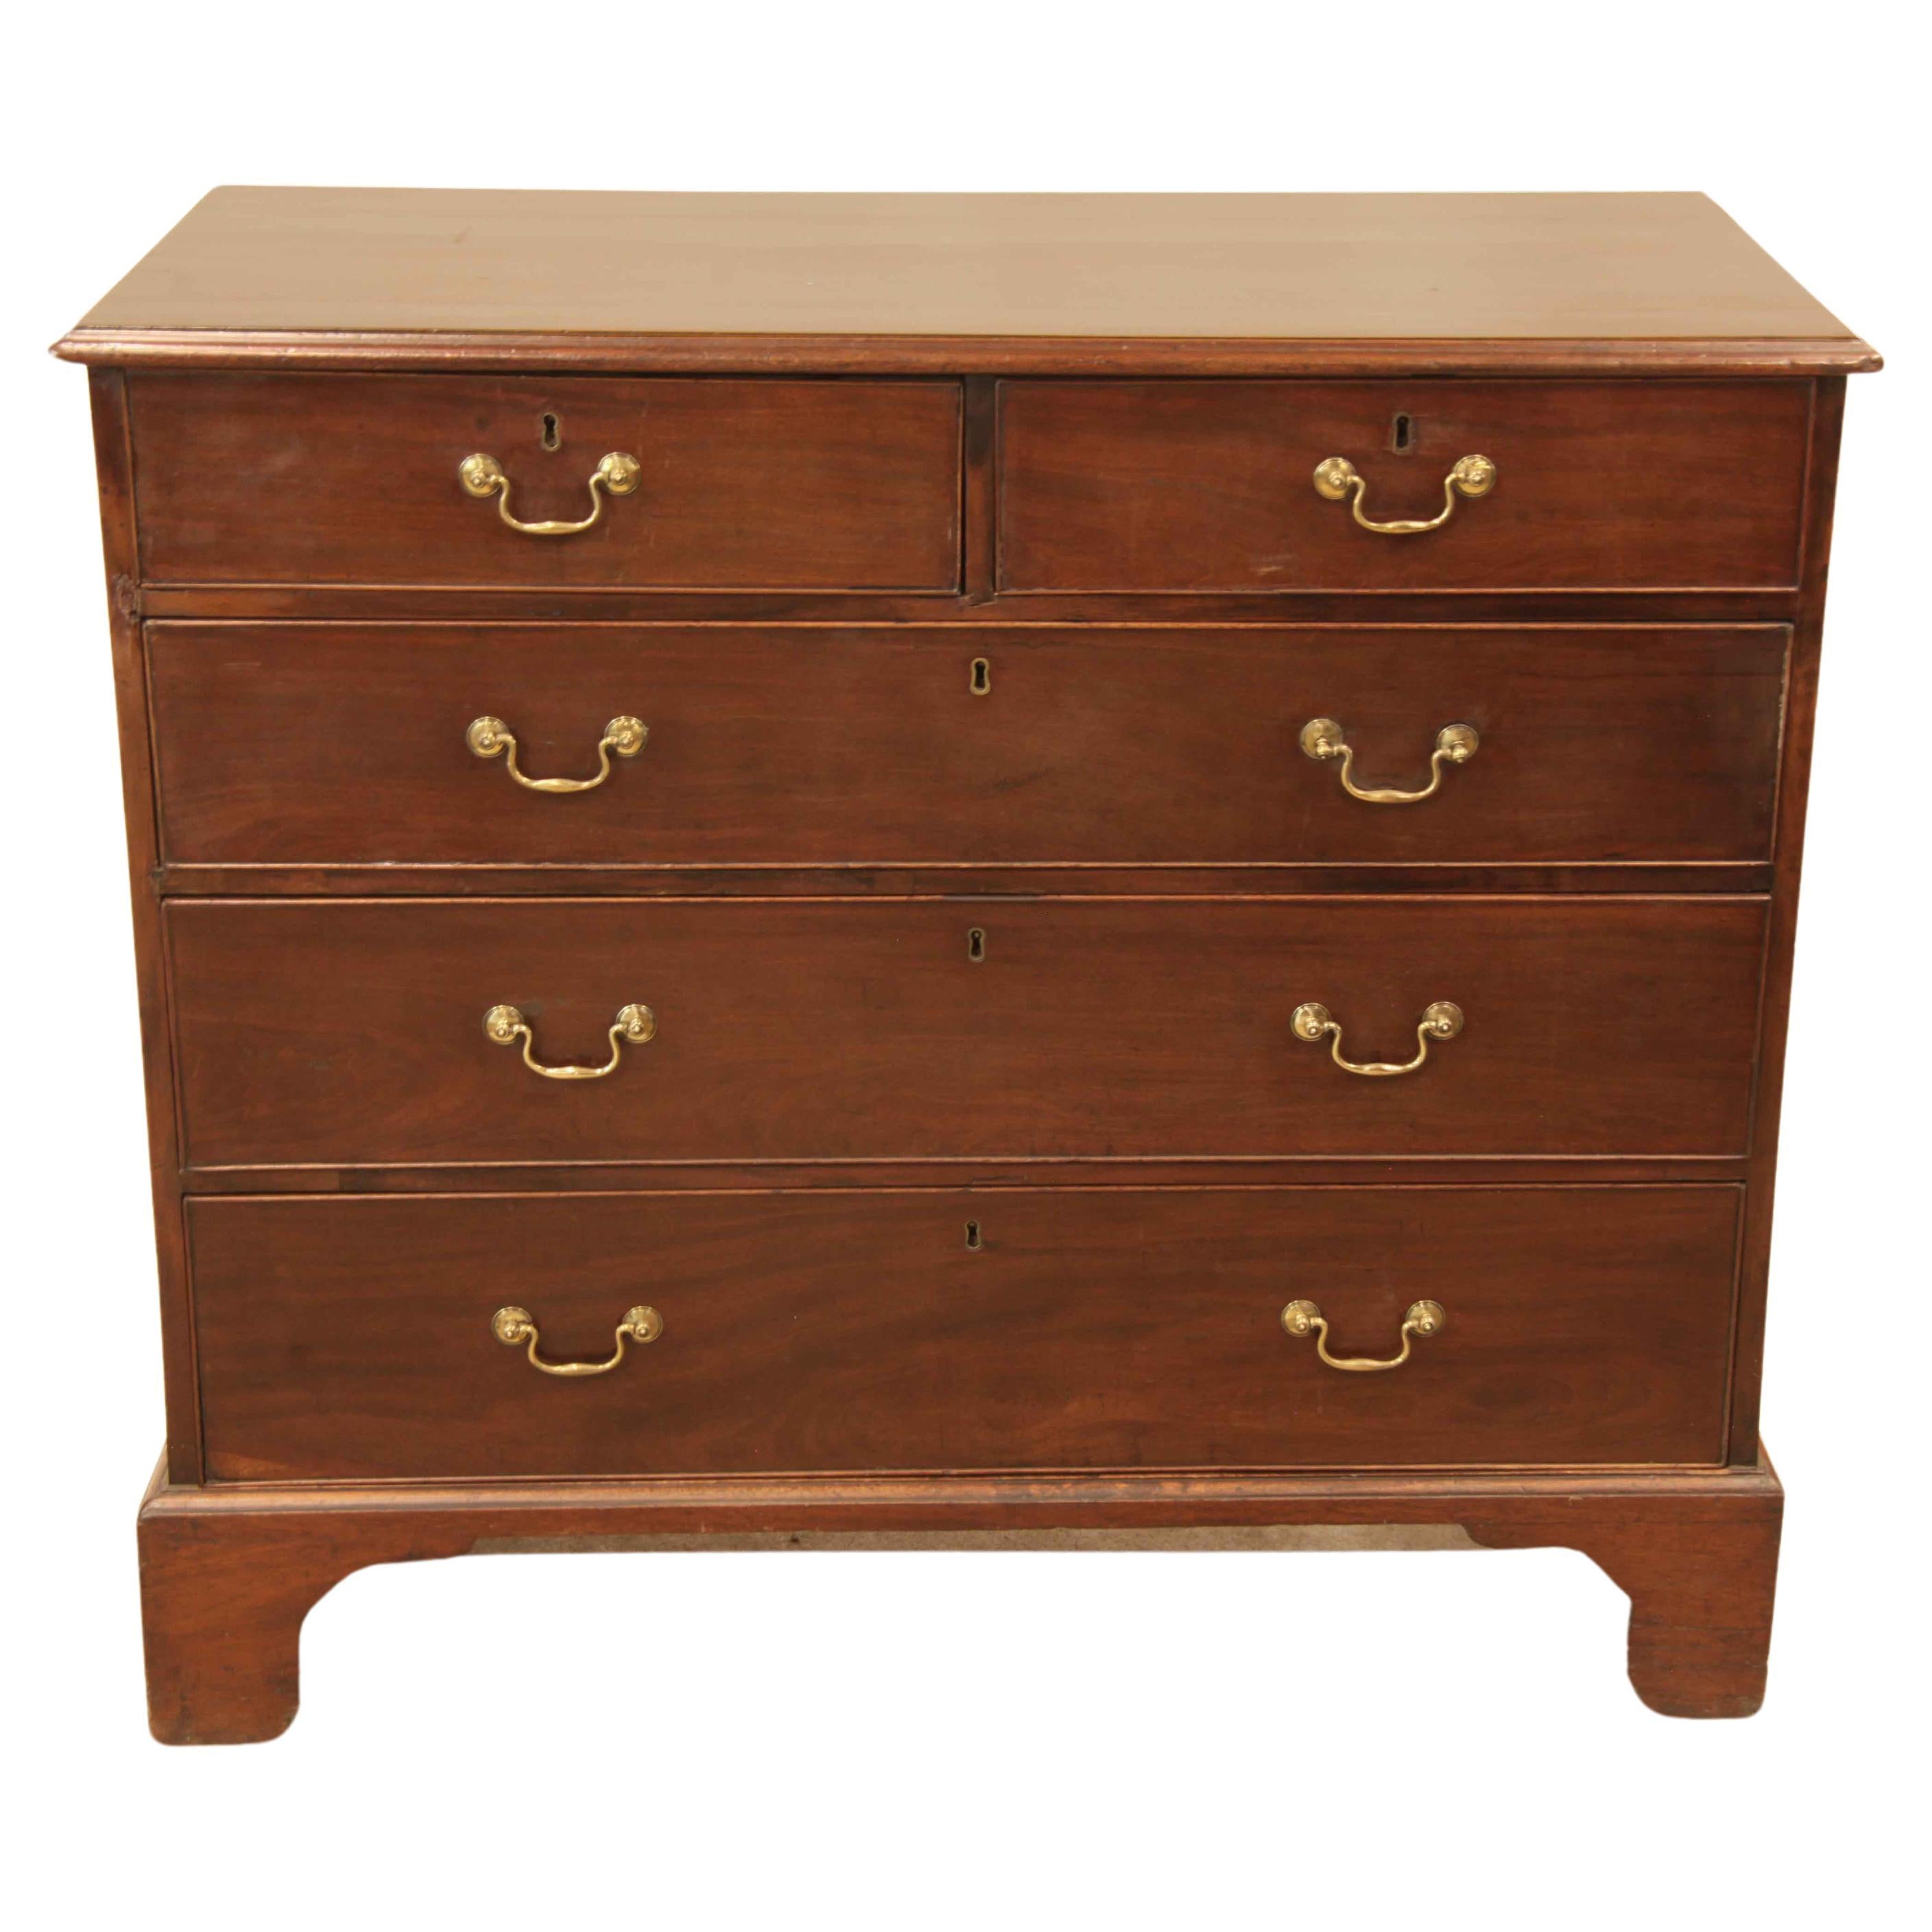 George III Five Drawer Chest